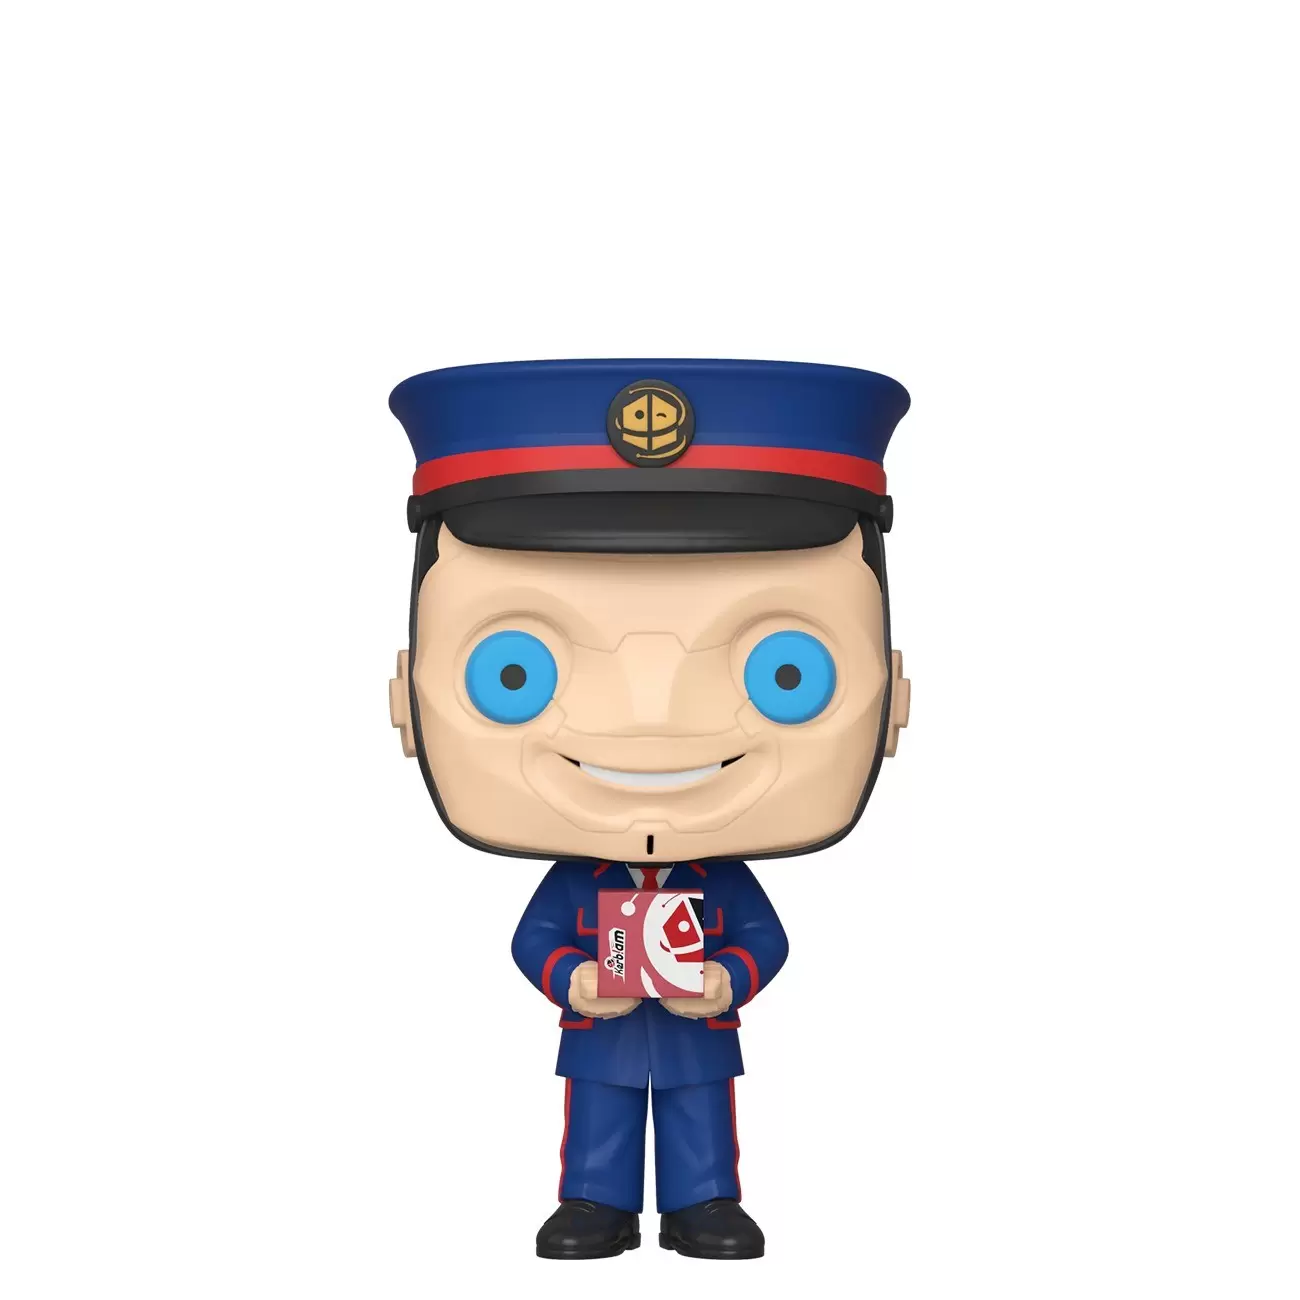 POP! Television - Doctor Who - The Kerblam Man